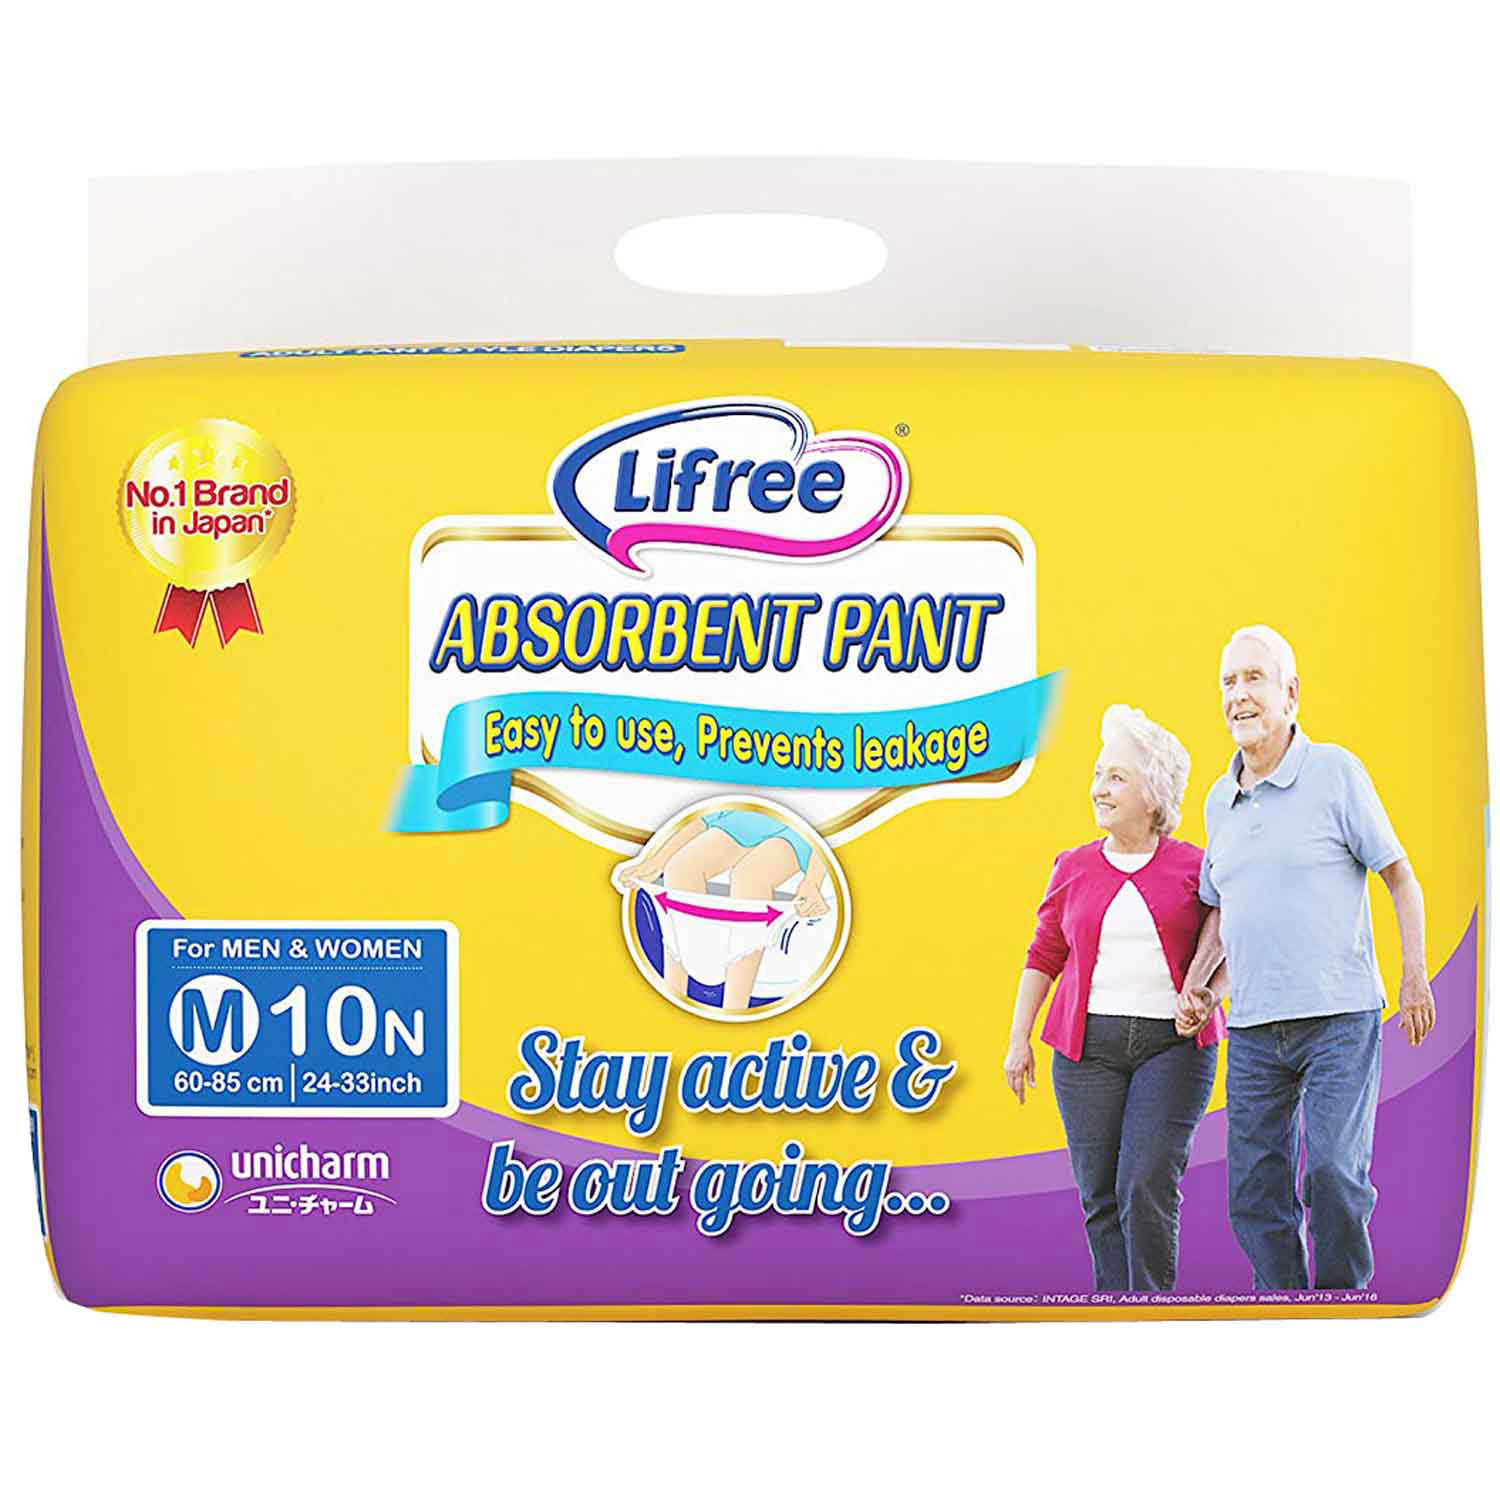 Lifree Extra Absorbent Adult Diaper Pants Medium, 10 Count, Pack of 1 